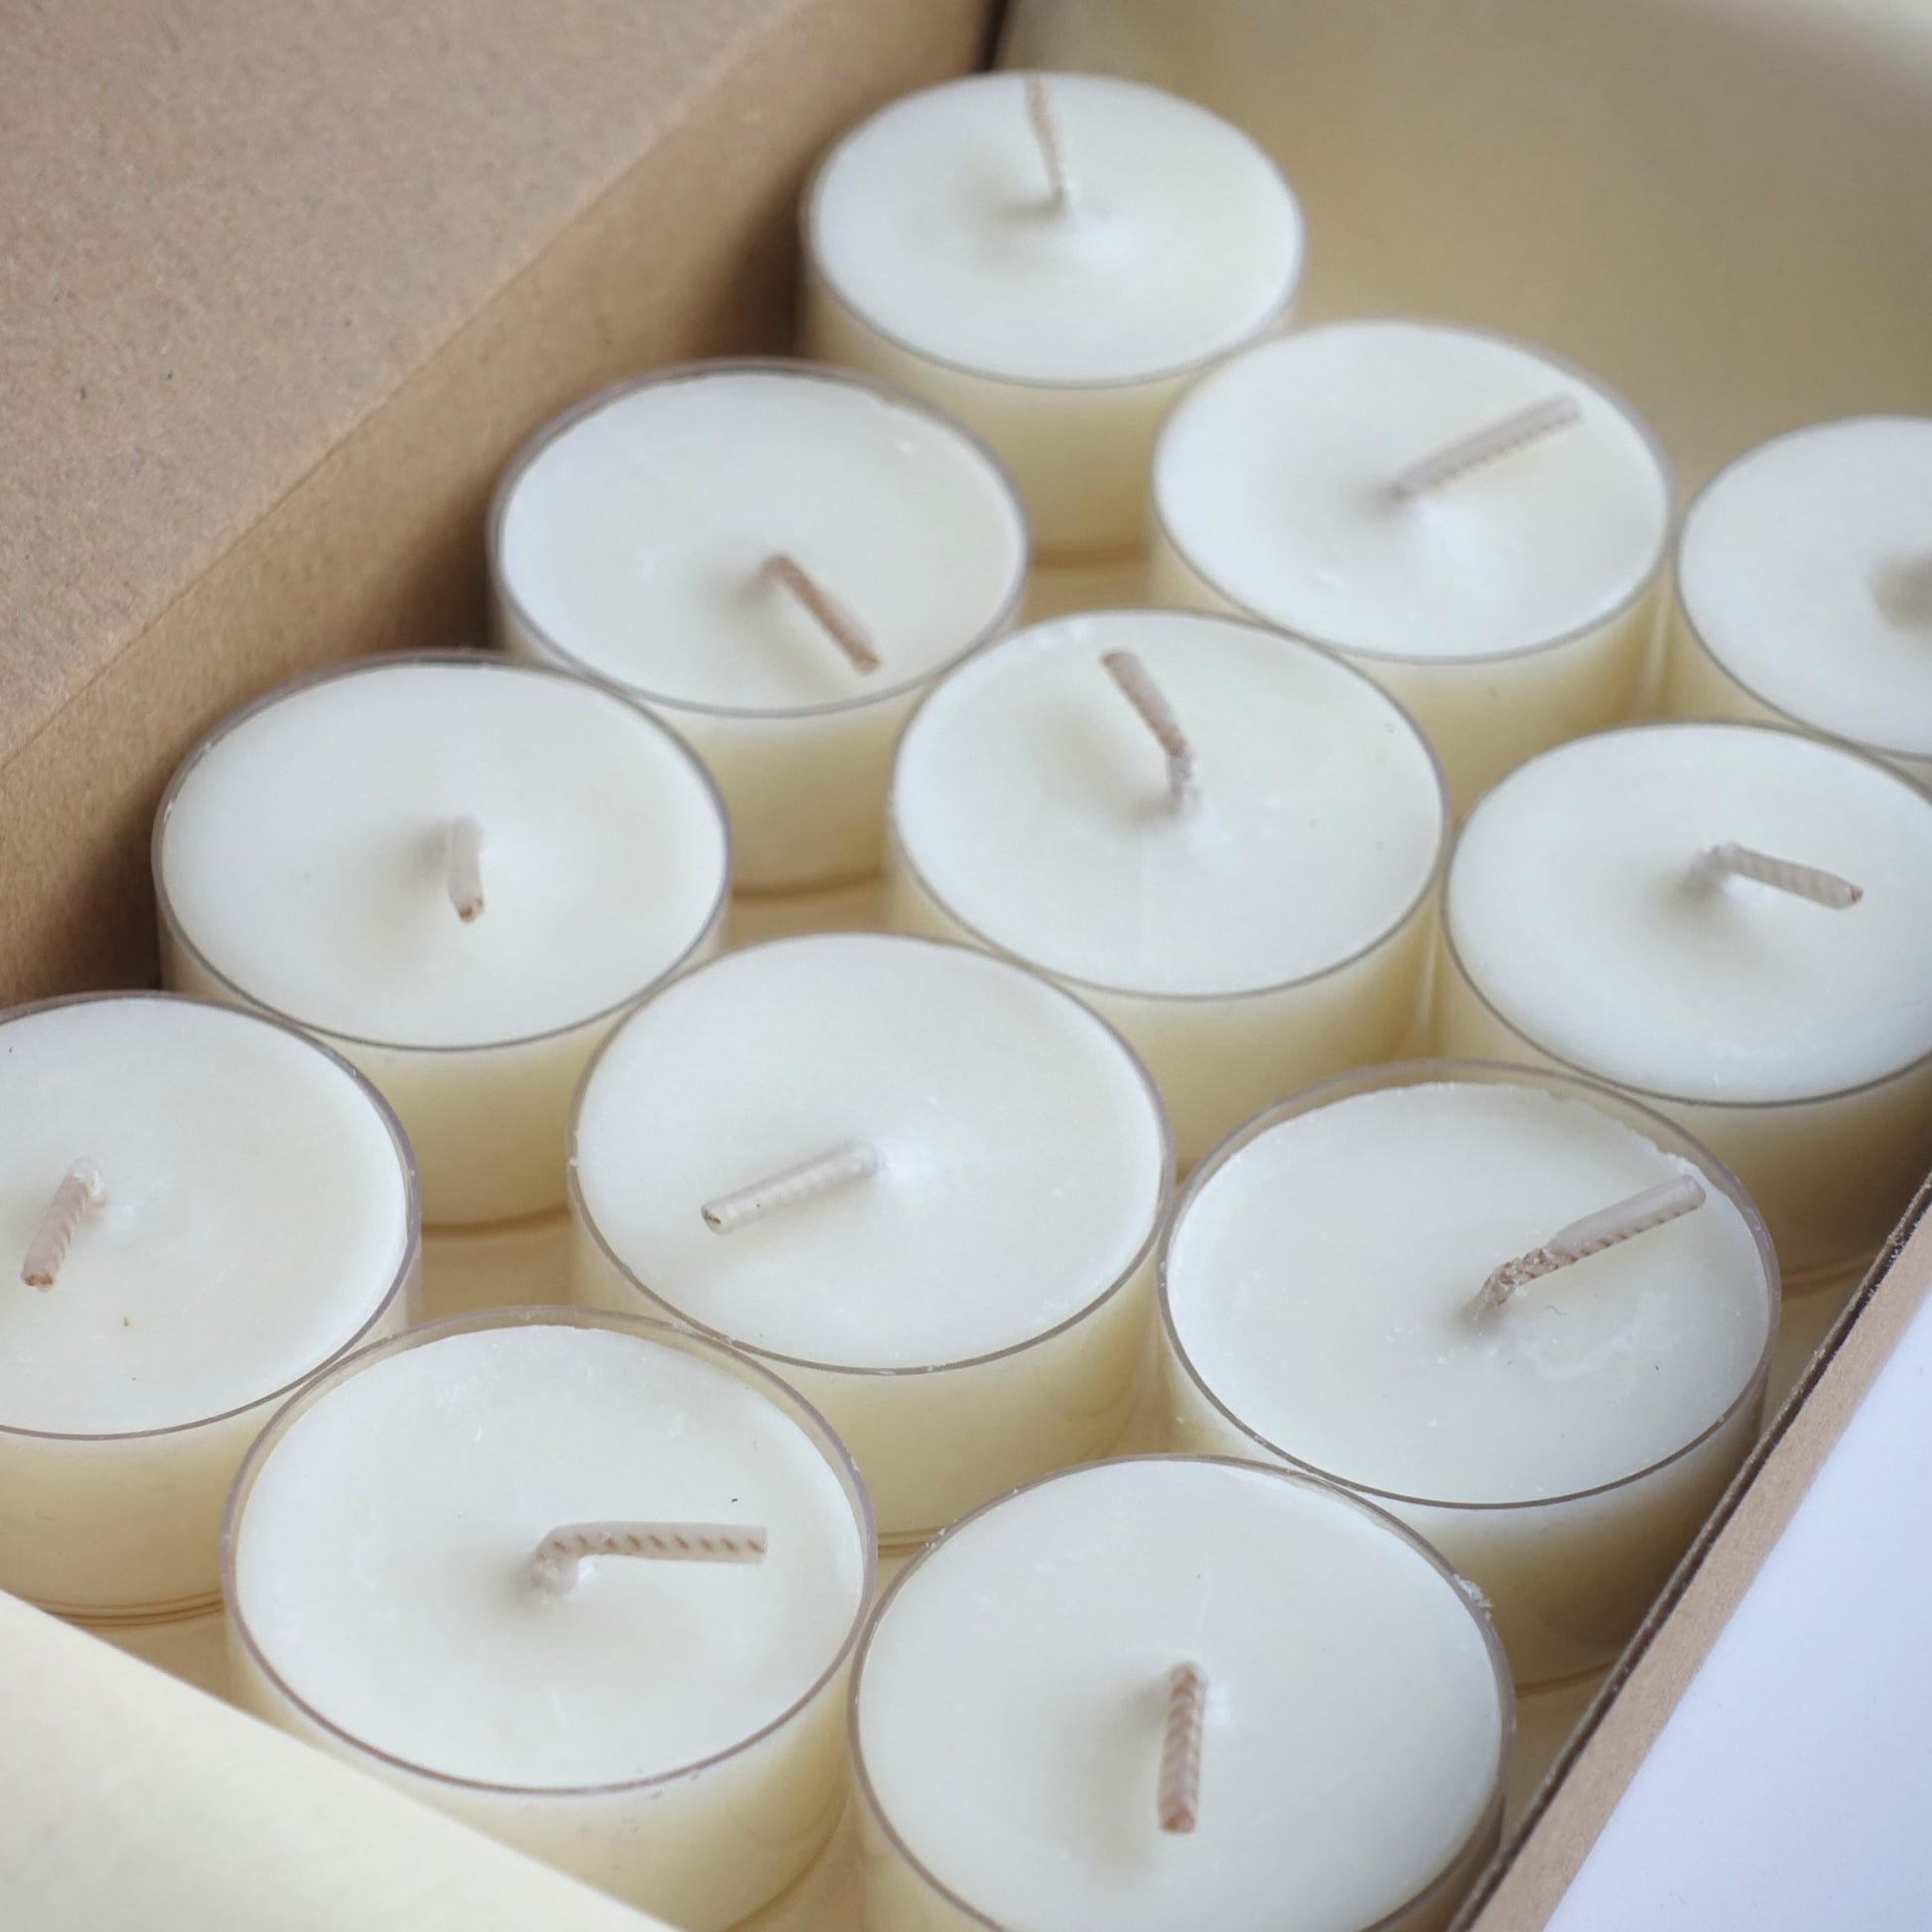 12 Shō-moon Natural Flow scented Tealights Candle with  pure essential oils and clean burning natural wax in their packaging box